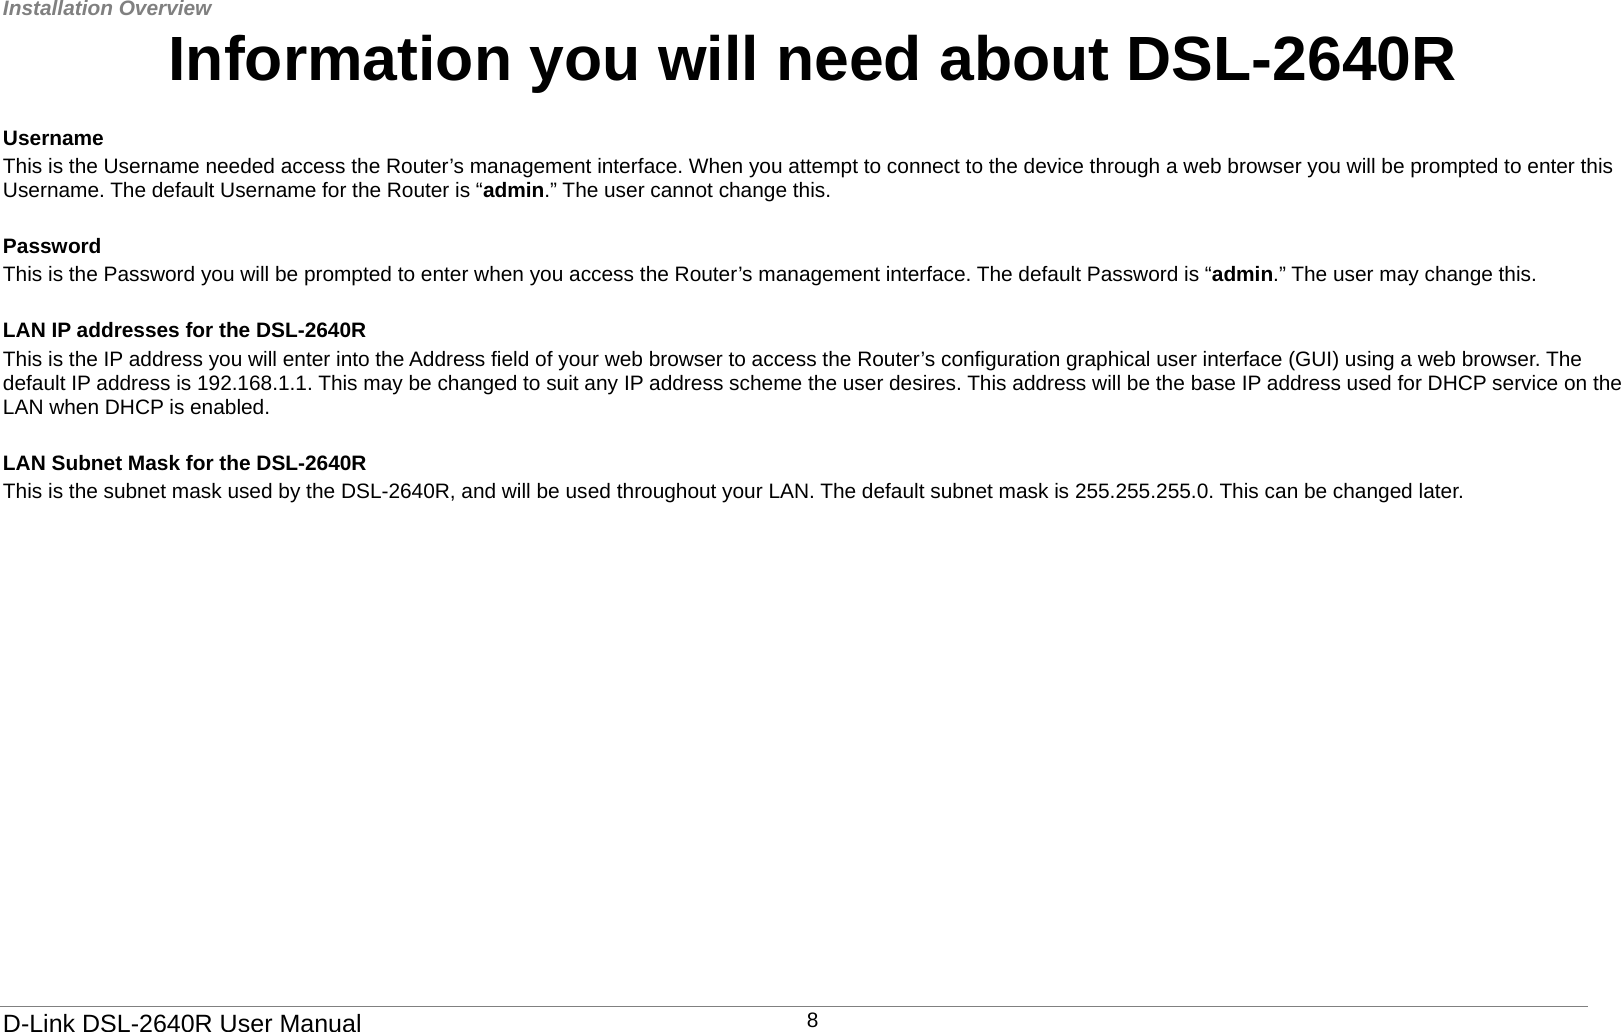 Installation Overview   D-Link DSL-2640R User Manual 8Information you will need about DSL-2640R  Username  This is the Username needed access the Router’s management interface. When you attempt to connect to the device through a web browser you will be prompted to enter this Username. The default Username for the Router is “admin.” The user cannot change this.    Password This is the Password you will be prompted to enter when you access the Router’s management interface. The default Password is “admin.” The user may change this.    LAN IP addresses for the DSL-2640R This is the IP address you will enter into the Address field of your web browser to access the Router’s configuration graphical user interface (GUI) using a web browser. The default IP address is 192.168.1.1. This may be changed to suit any IP address scheme the user desires. This address will be the base IP address used for DHCP service on the LAN when DHCP is enabled.    LAN Subnet Mask for the DSL-2640R This is the subnet mask used by the DSL-2640R, and will be used throughout your LAN. The default subnet mask is 255.255.255.0. This can be changed later.   